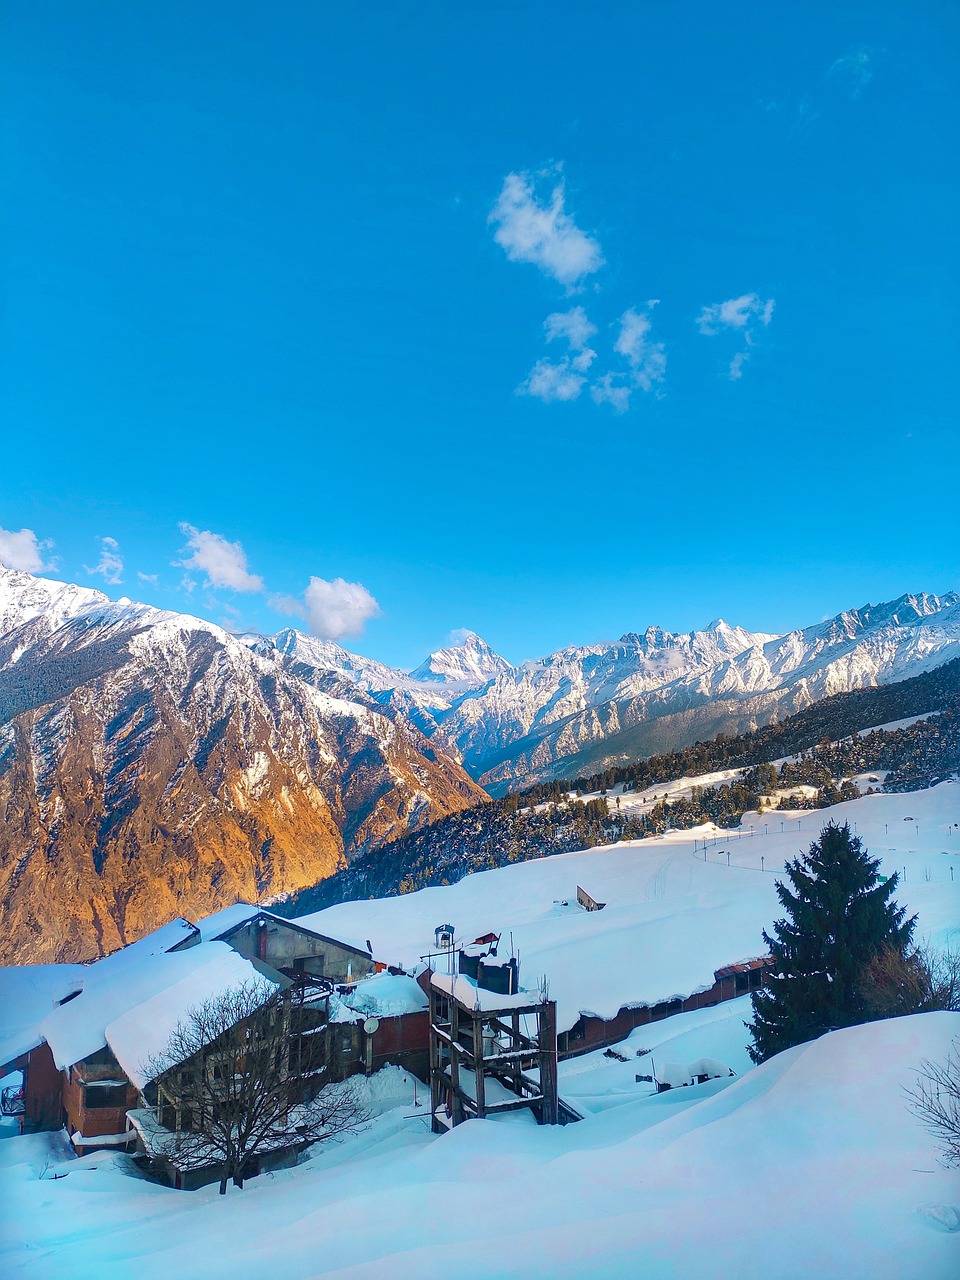 Skiing and Relaxation in Auli: A 4-Day Winter Getaway